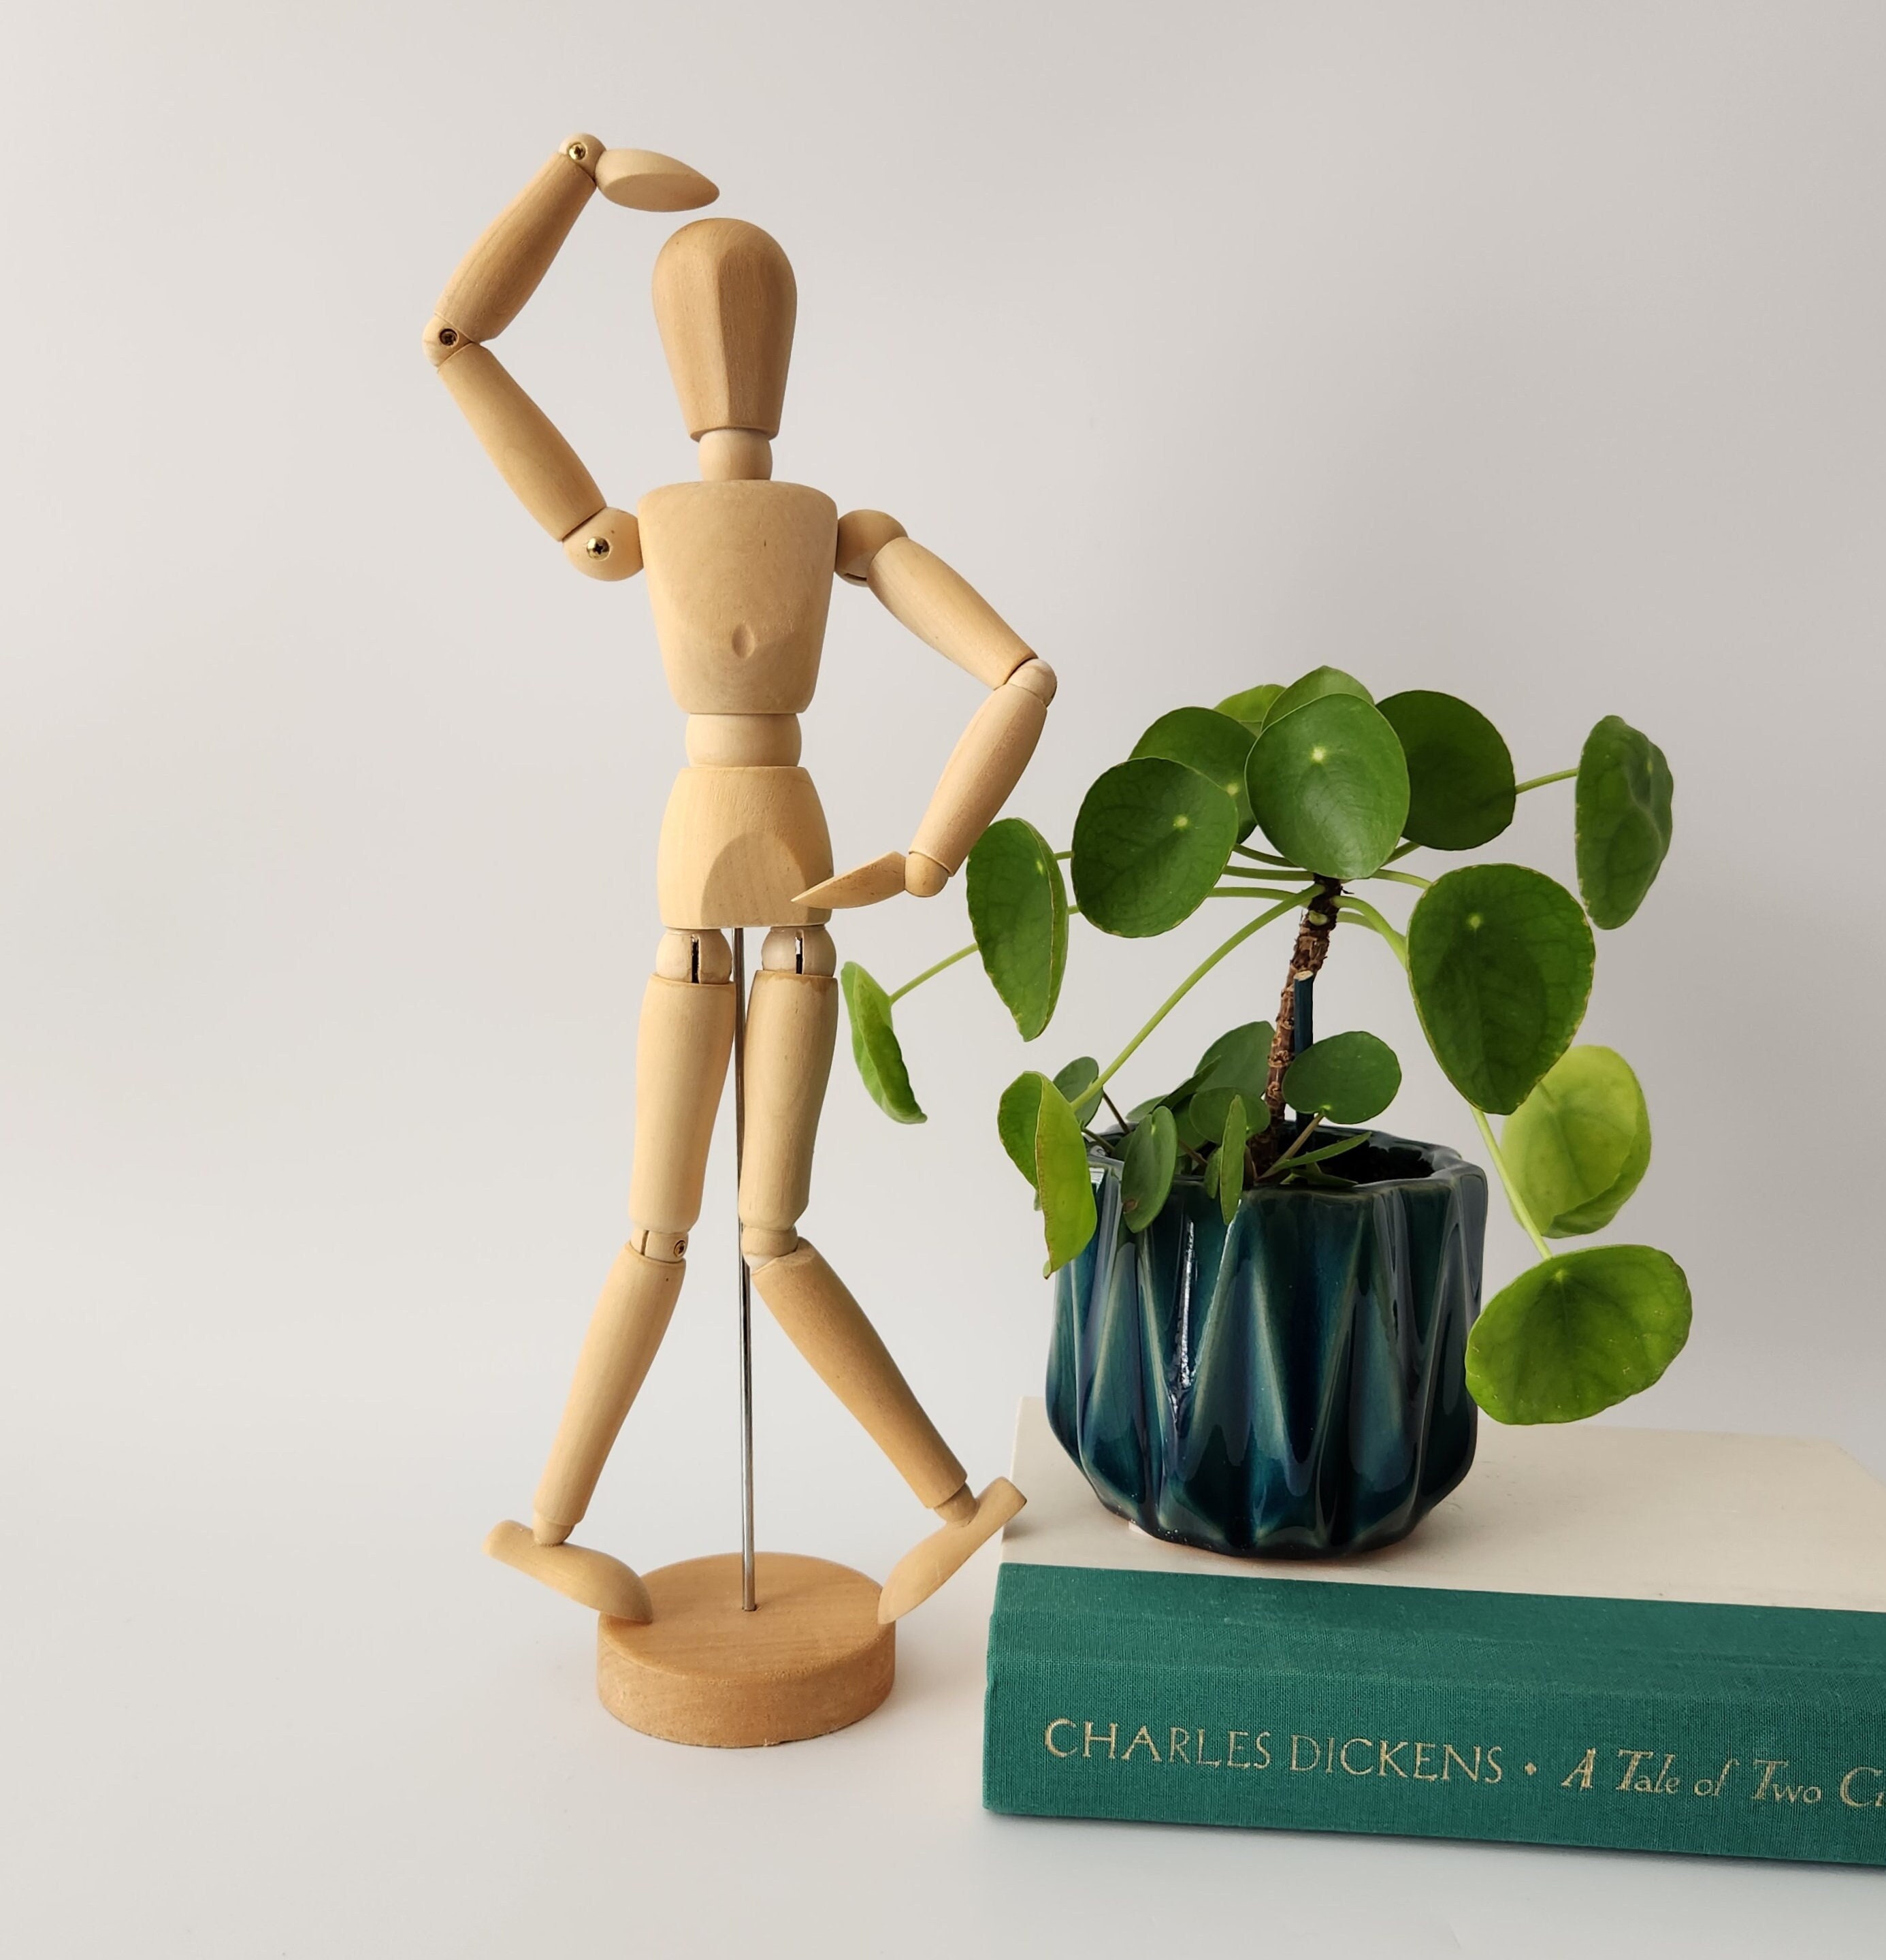 MANNEQUIN - WOODEN WITH MOVEABLE JOINTS (11 1/2) on eBid United